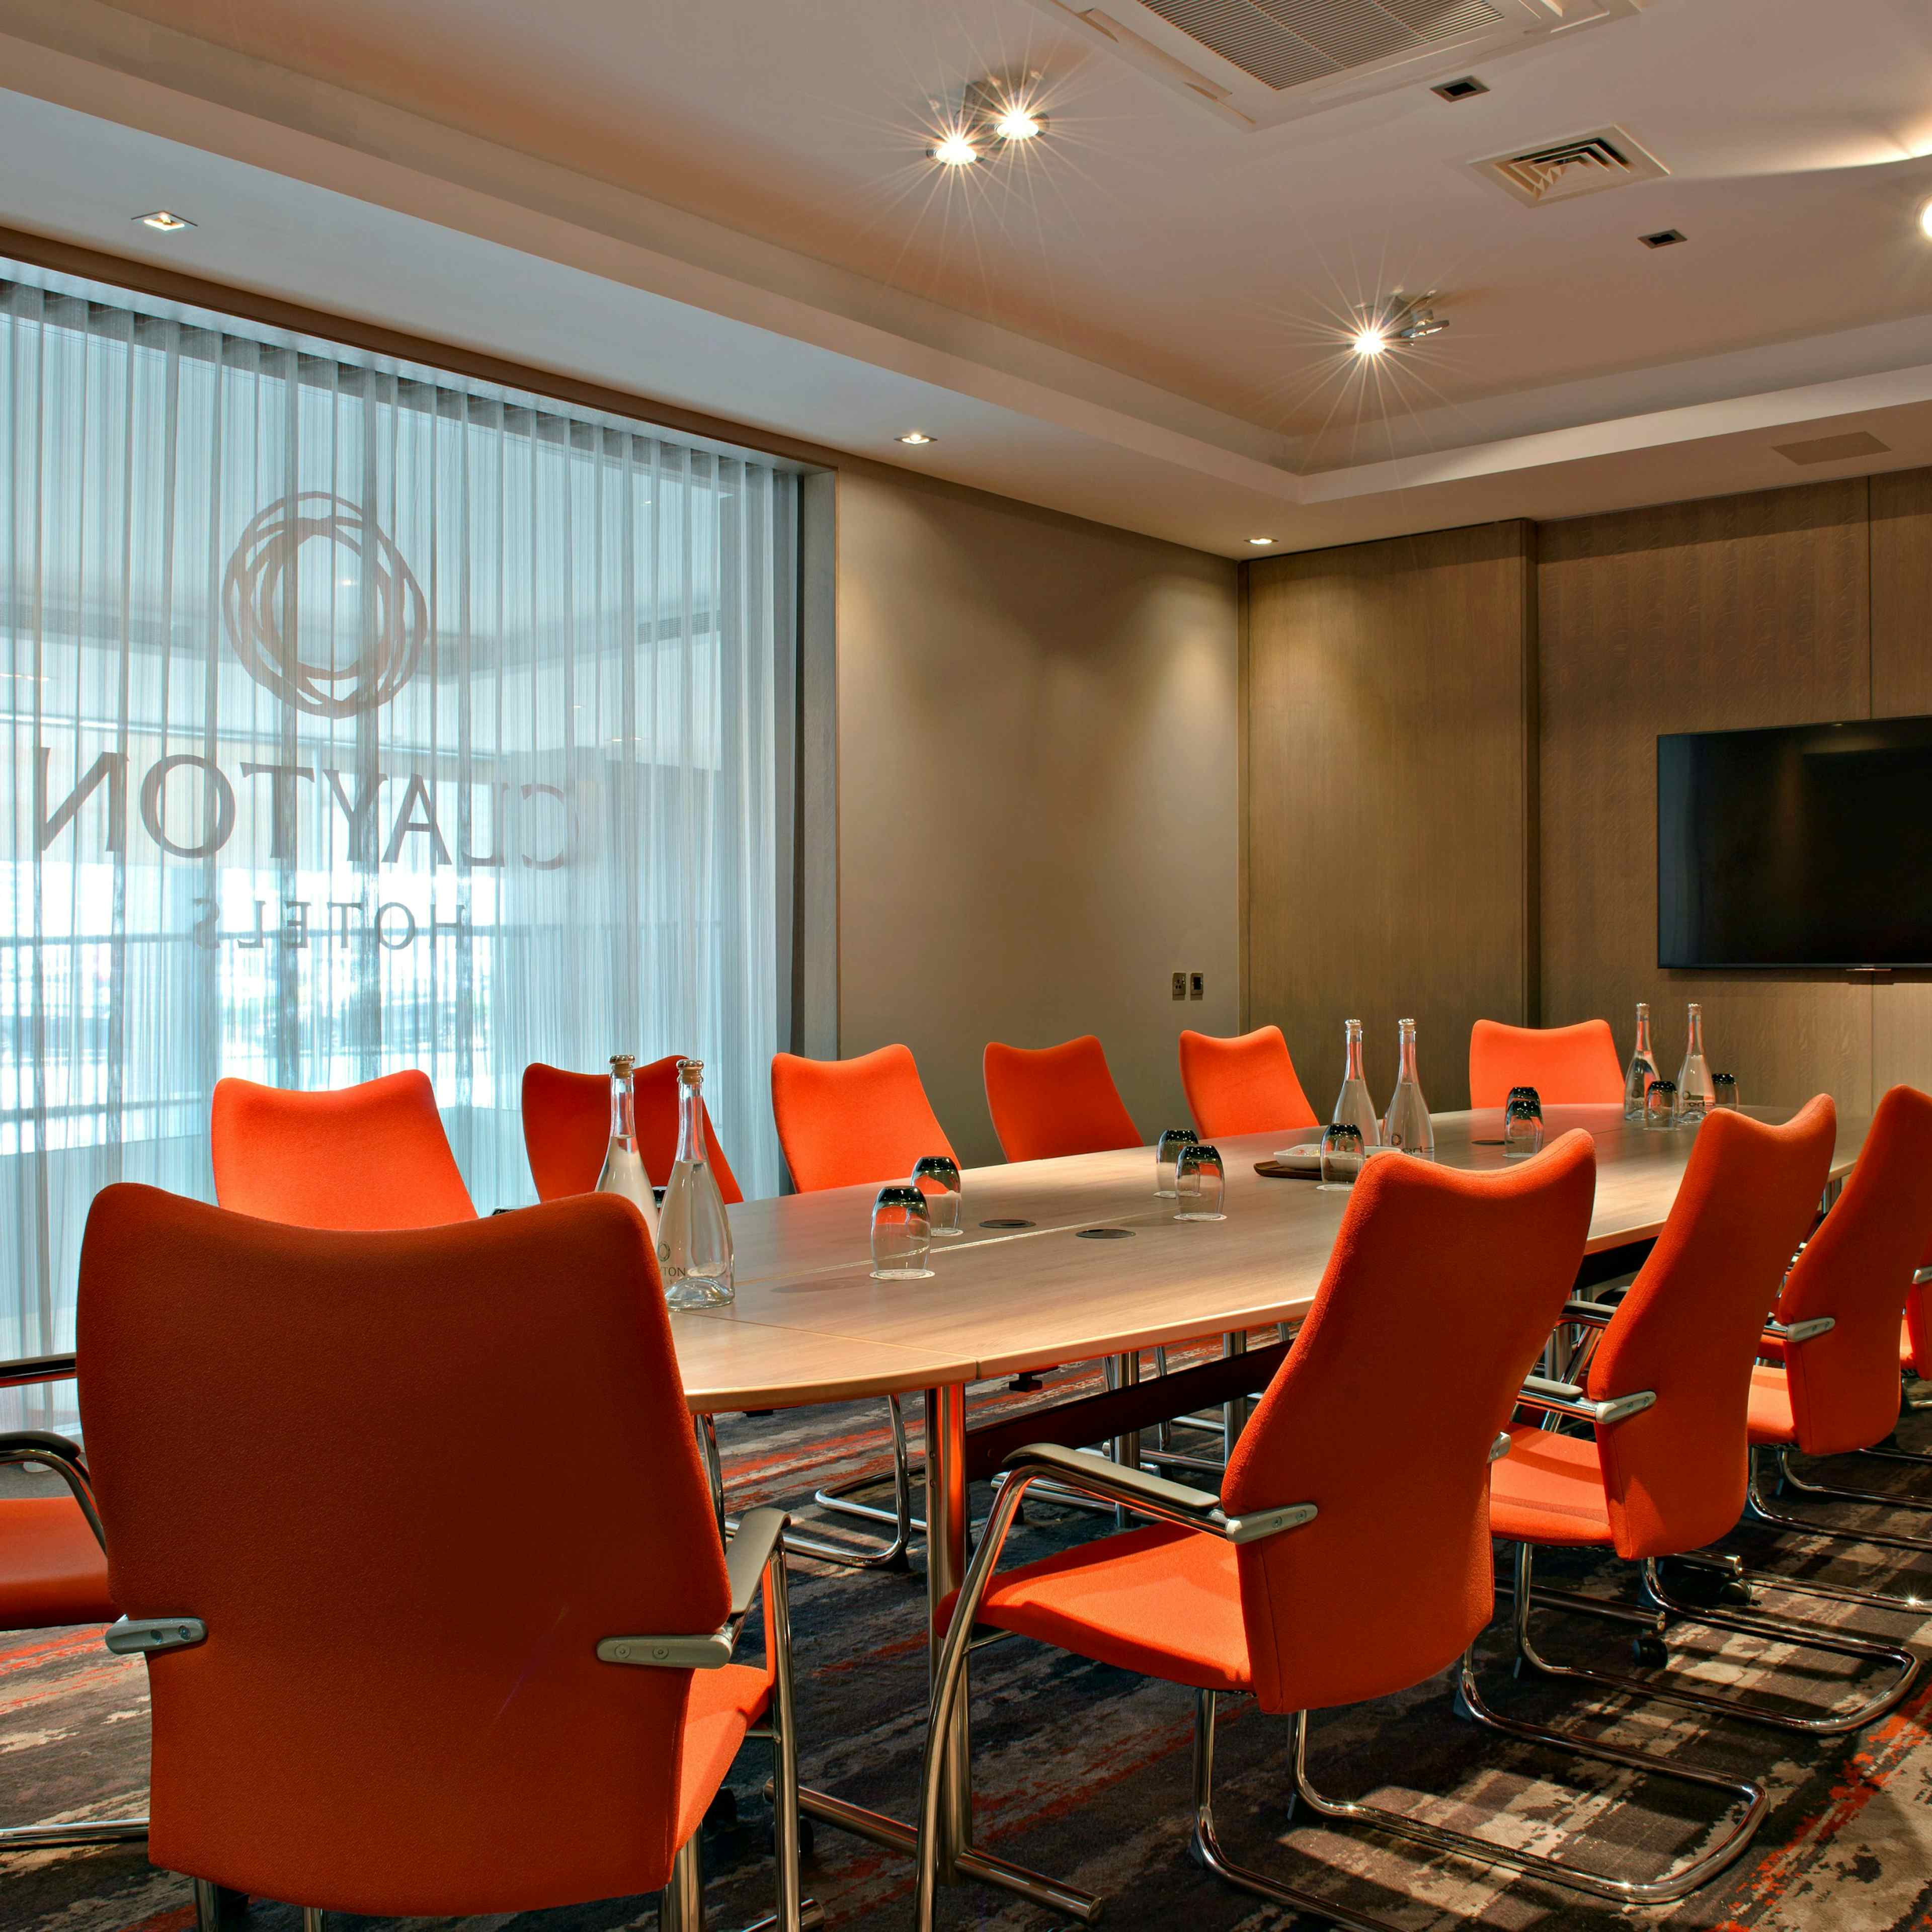 Clayton Hotel Chiswick - The Boardroom image 1